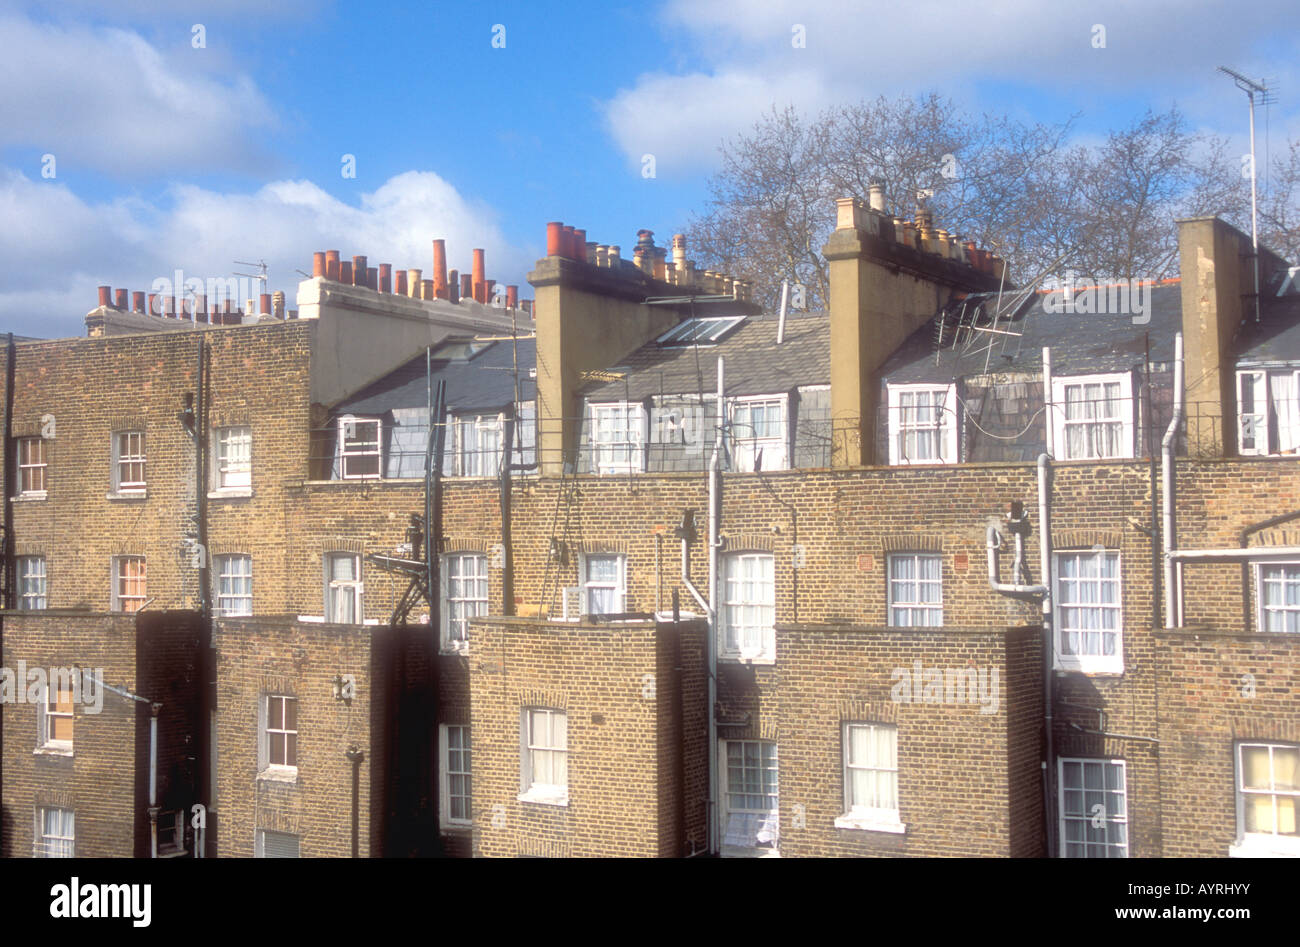 London England roof tops and chimnies or chimneys Stock Photo - Alamy